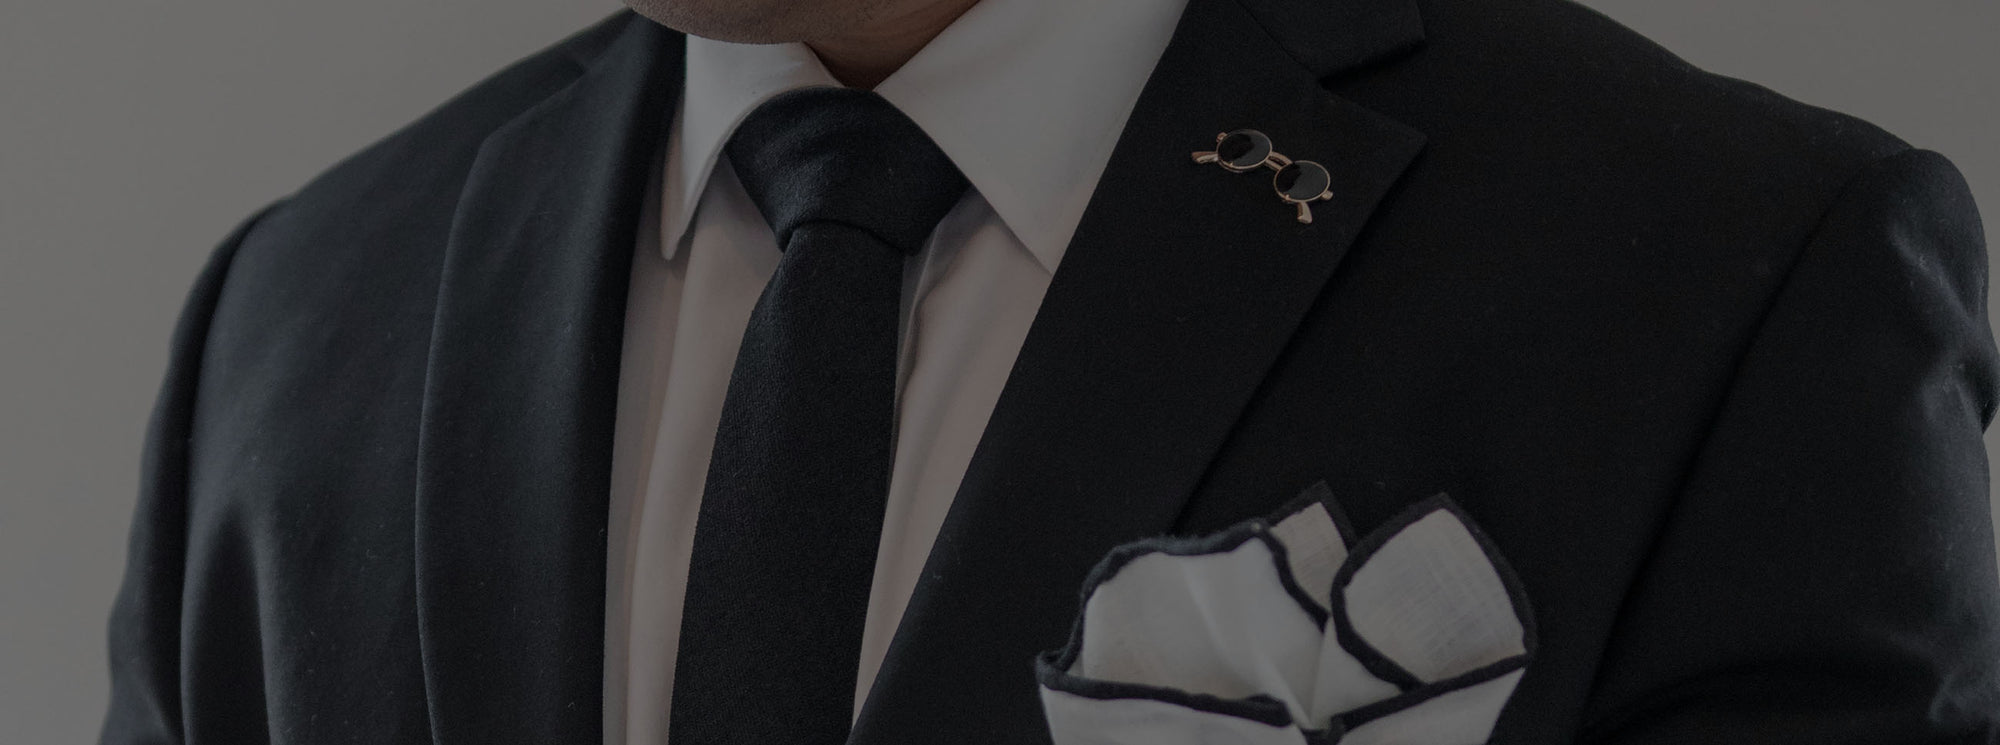 charcoal grey suit with enamel lapel pin